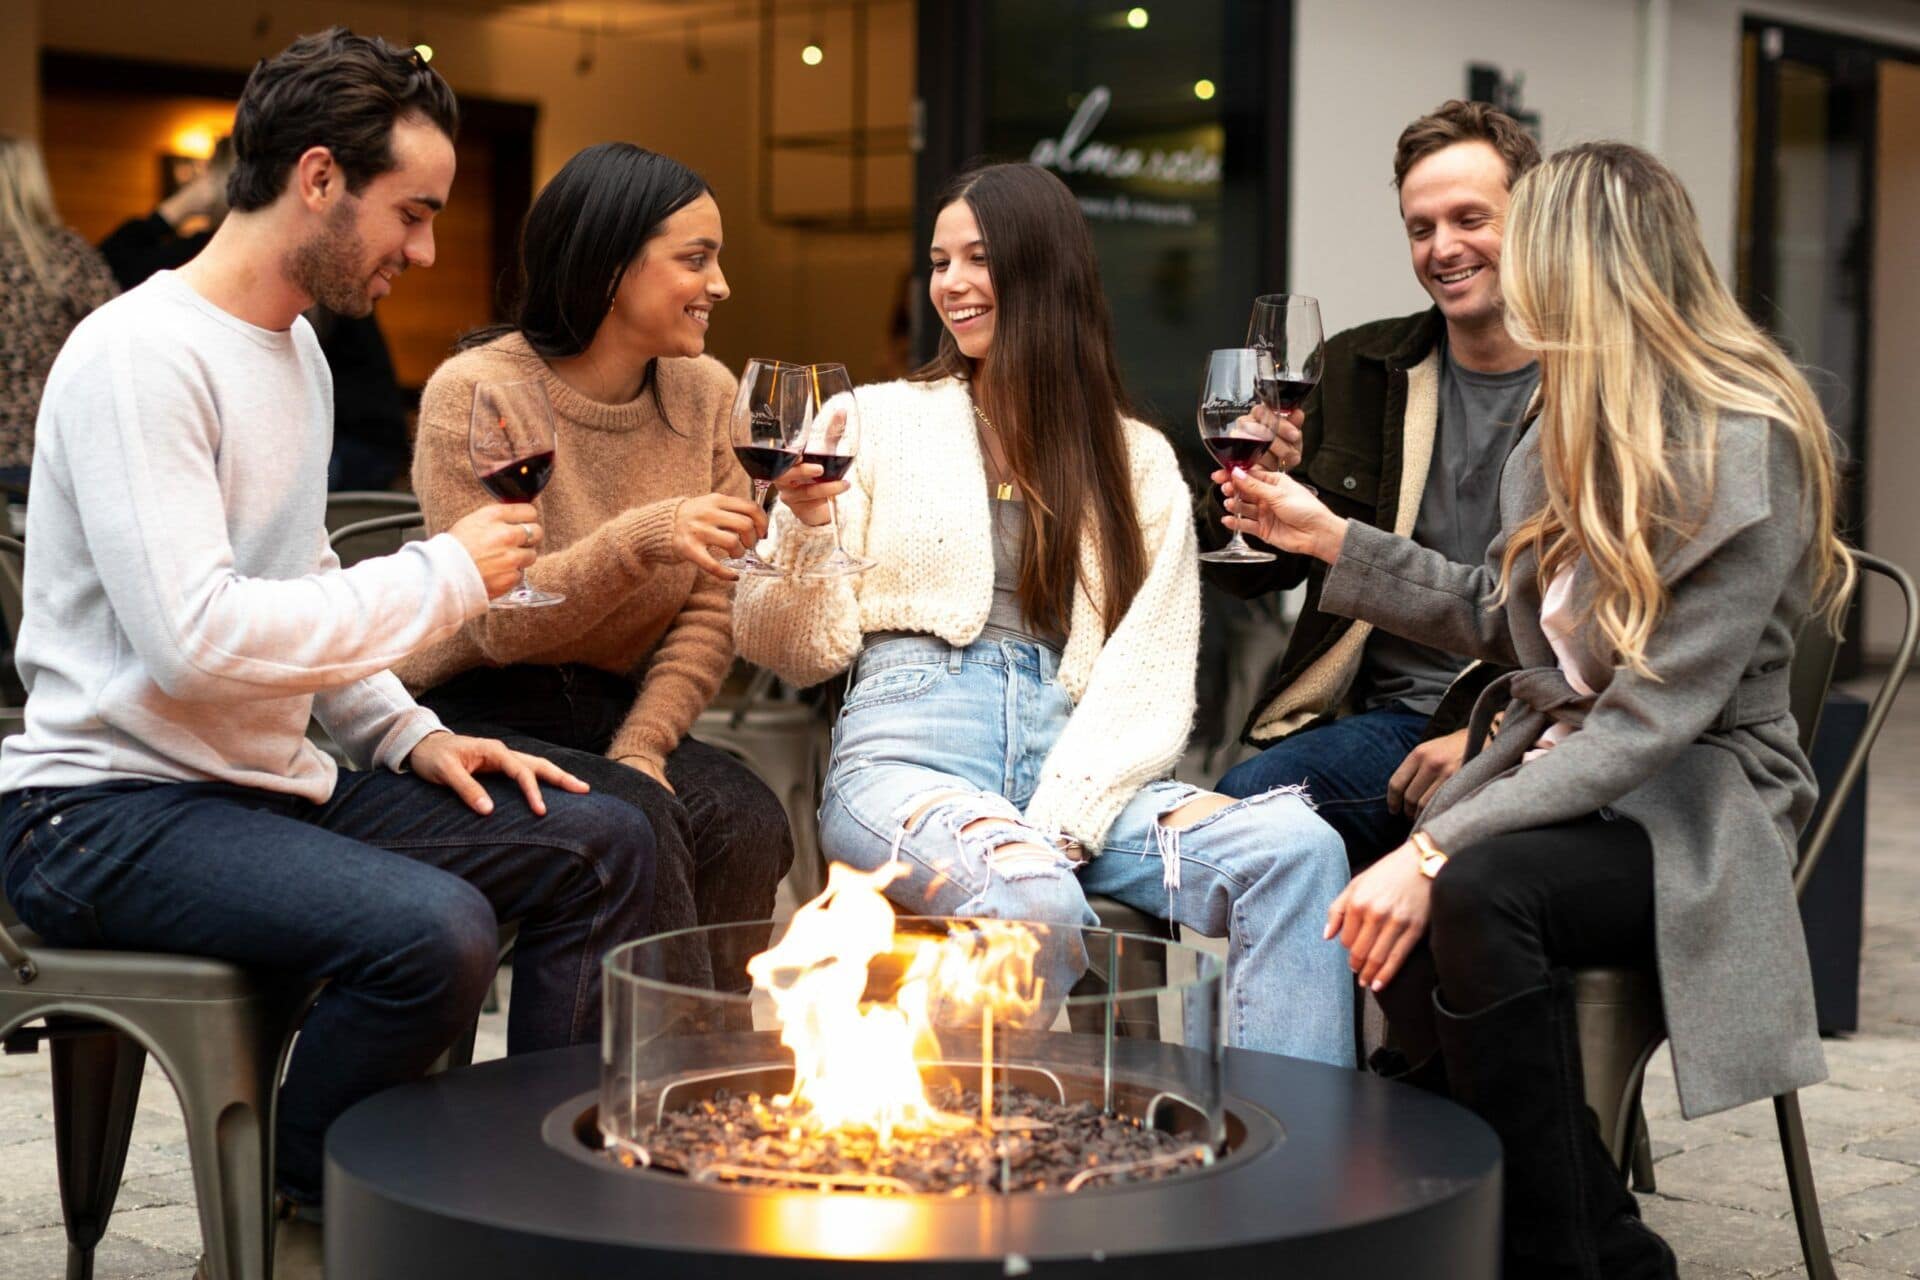 Group of people have wine